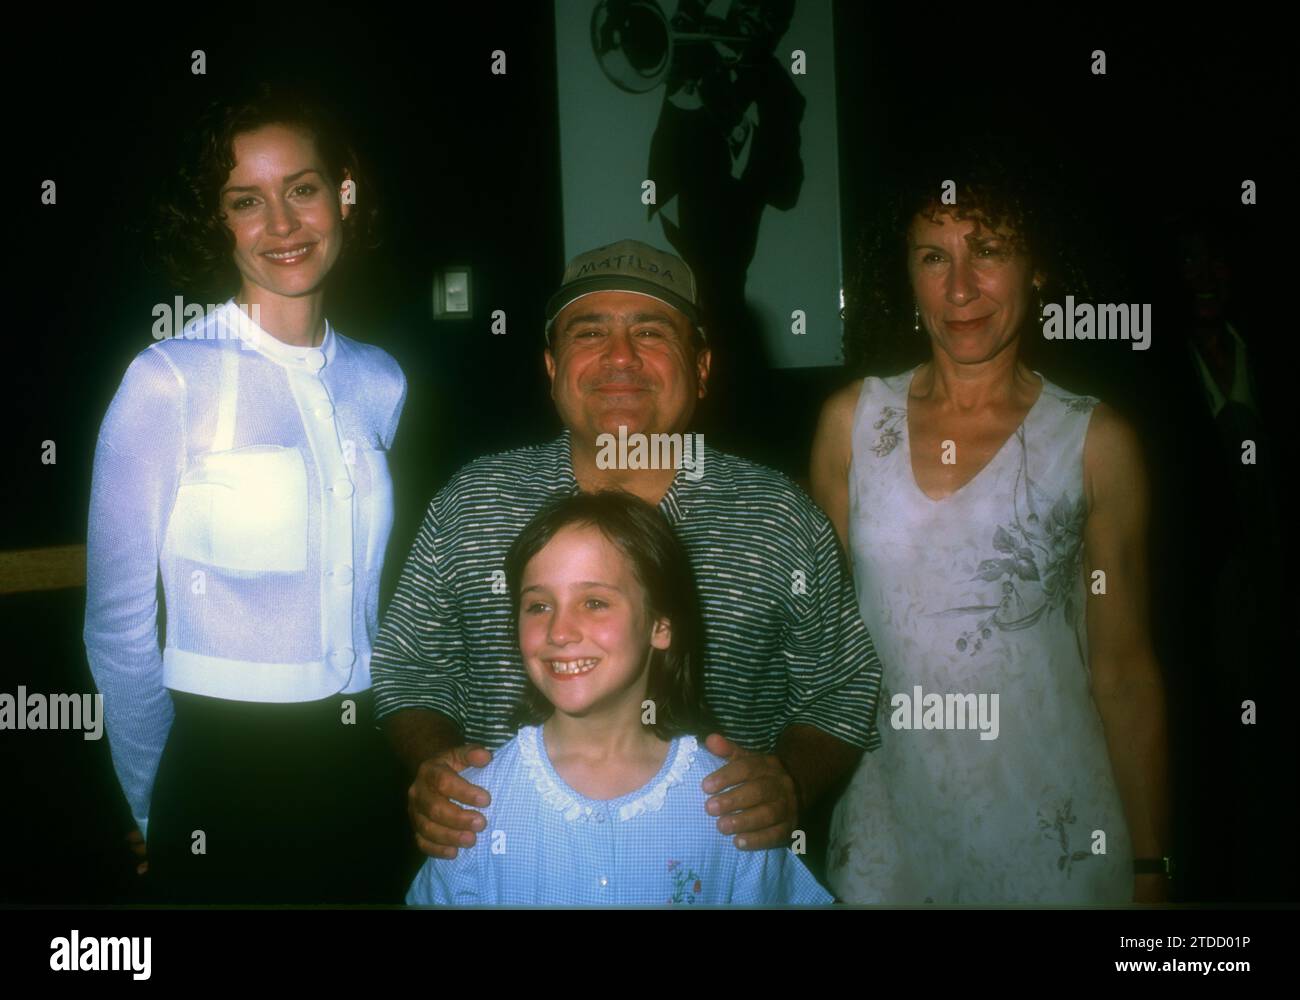 Culver City, California, USA 28th July 1996 Actress Embeth Davitz, Actor Danny DeVito,Actress Mara Wilson and Actress Rhea Perlman attend Matilda Premiere at Mann Culver Theater on July 28, 1996 in Cuvler City, California, USA. Photo by Barry King/Alamy Stock Photo Stock Photo